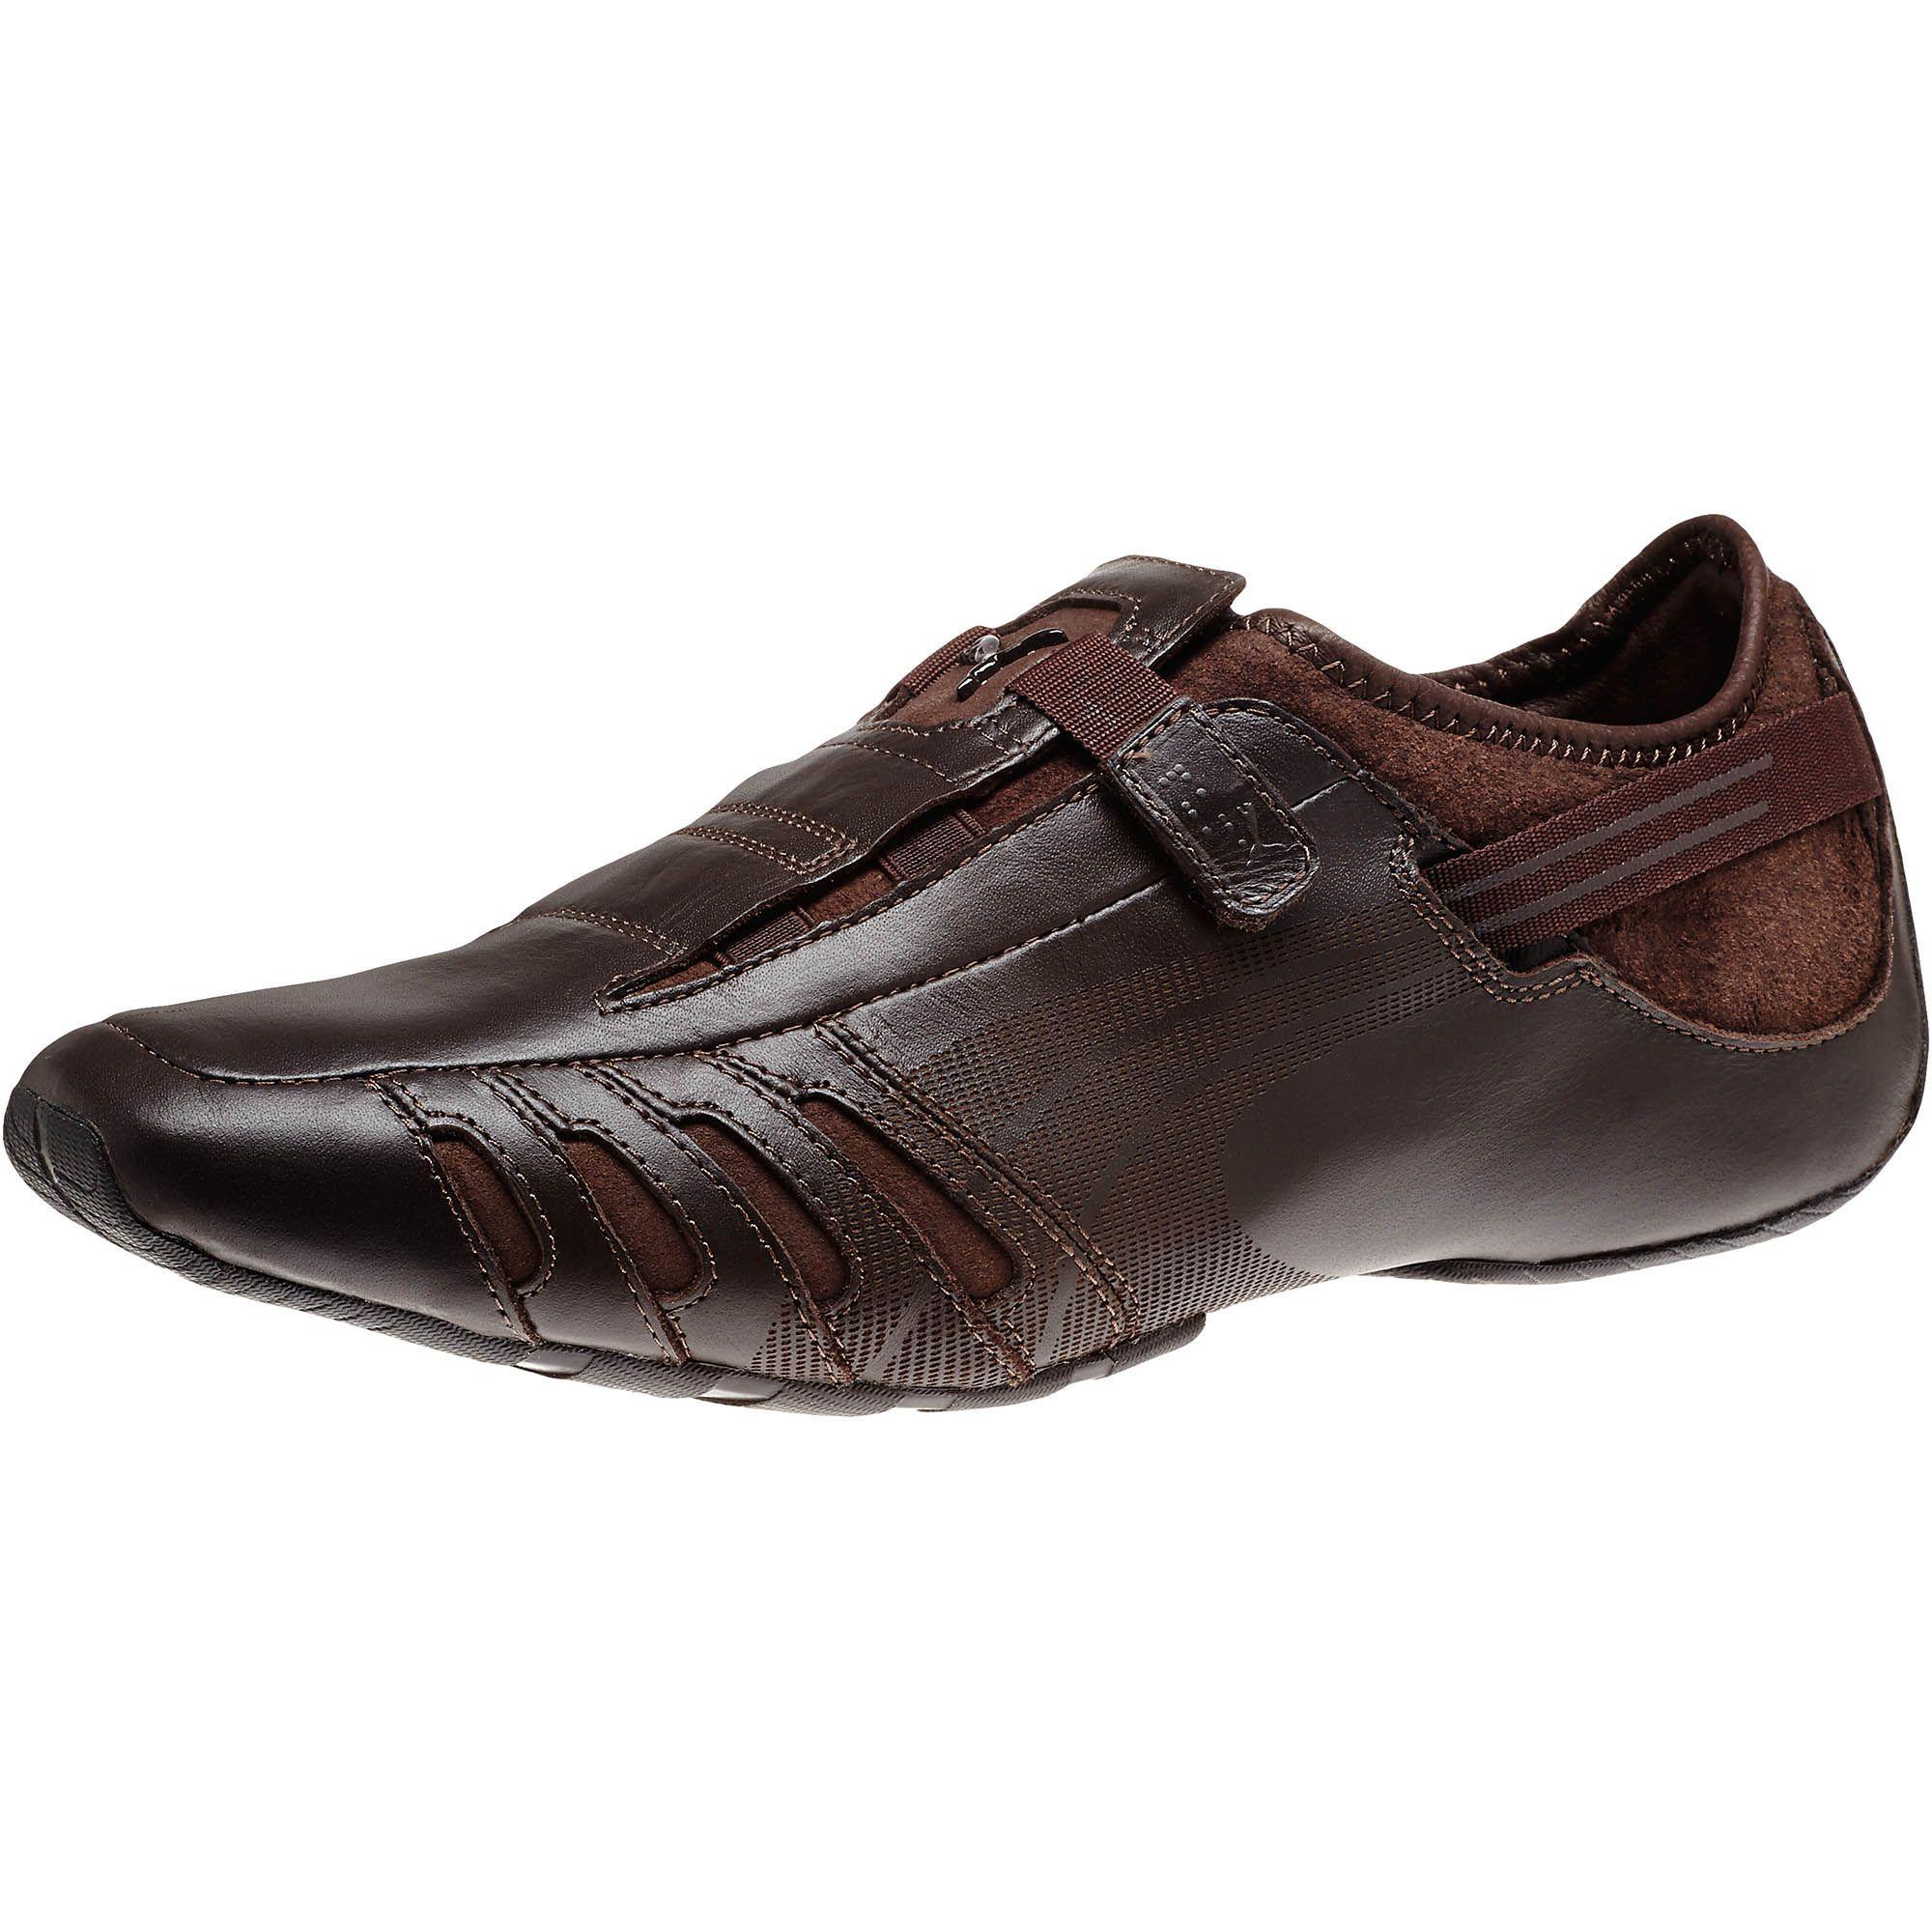 PUMA Leather Vedano Men's Shoes in 